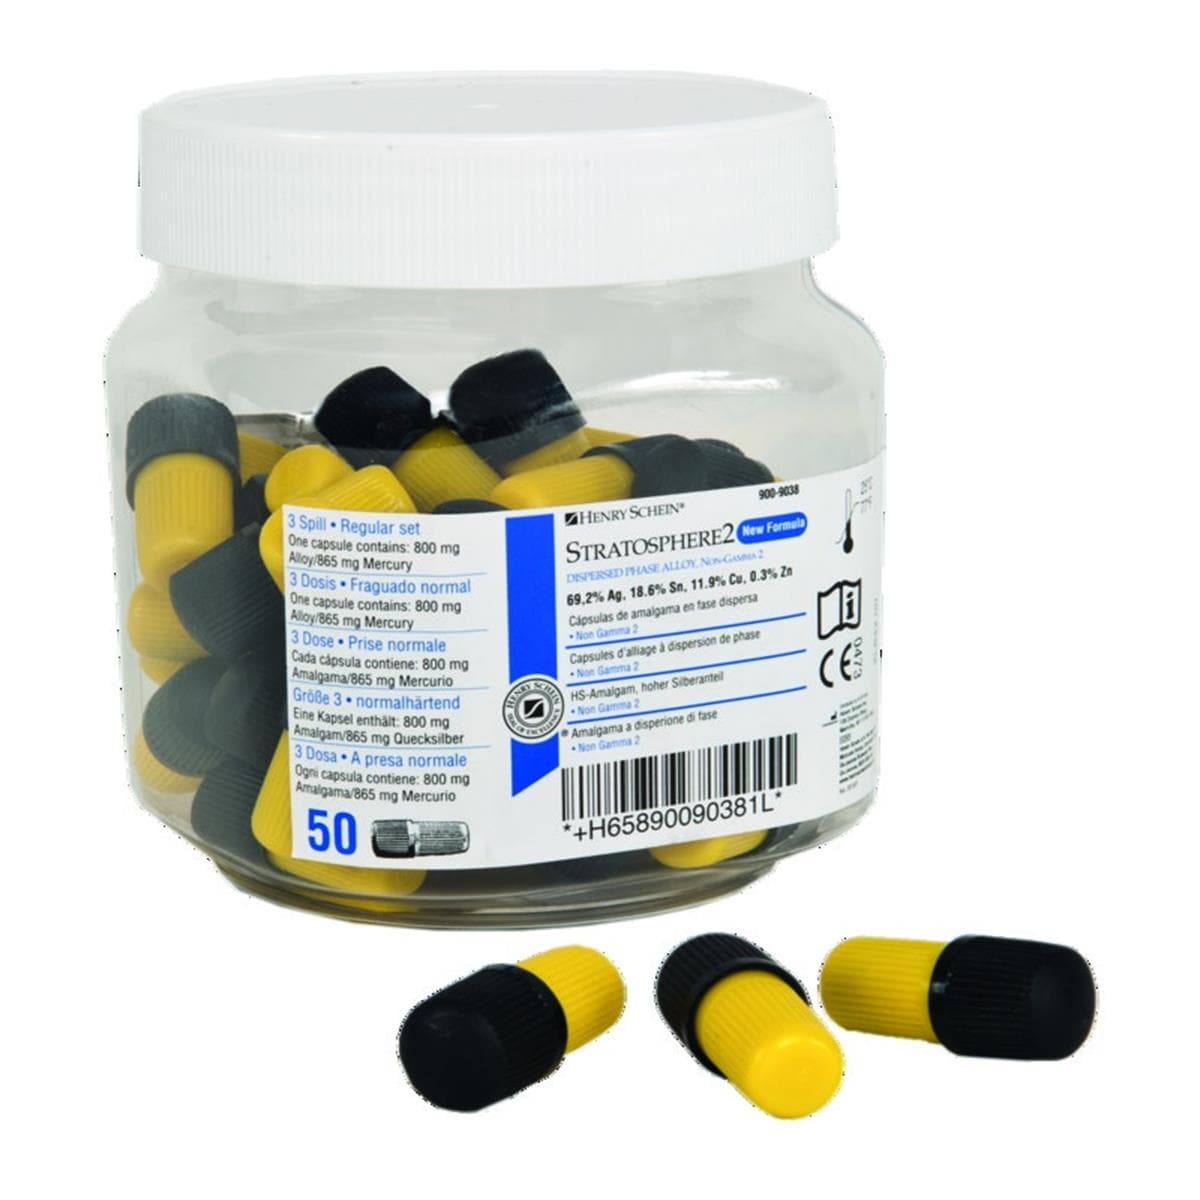 Stratosphere HENRY SCHEIN - Simple dose - Capsules - Bote de 50